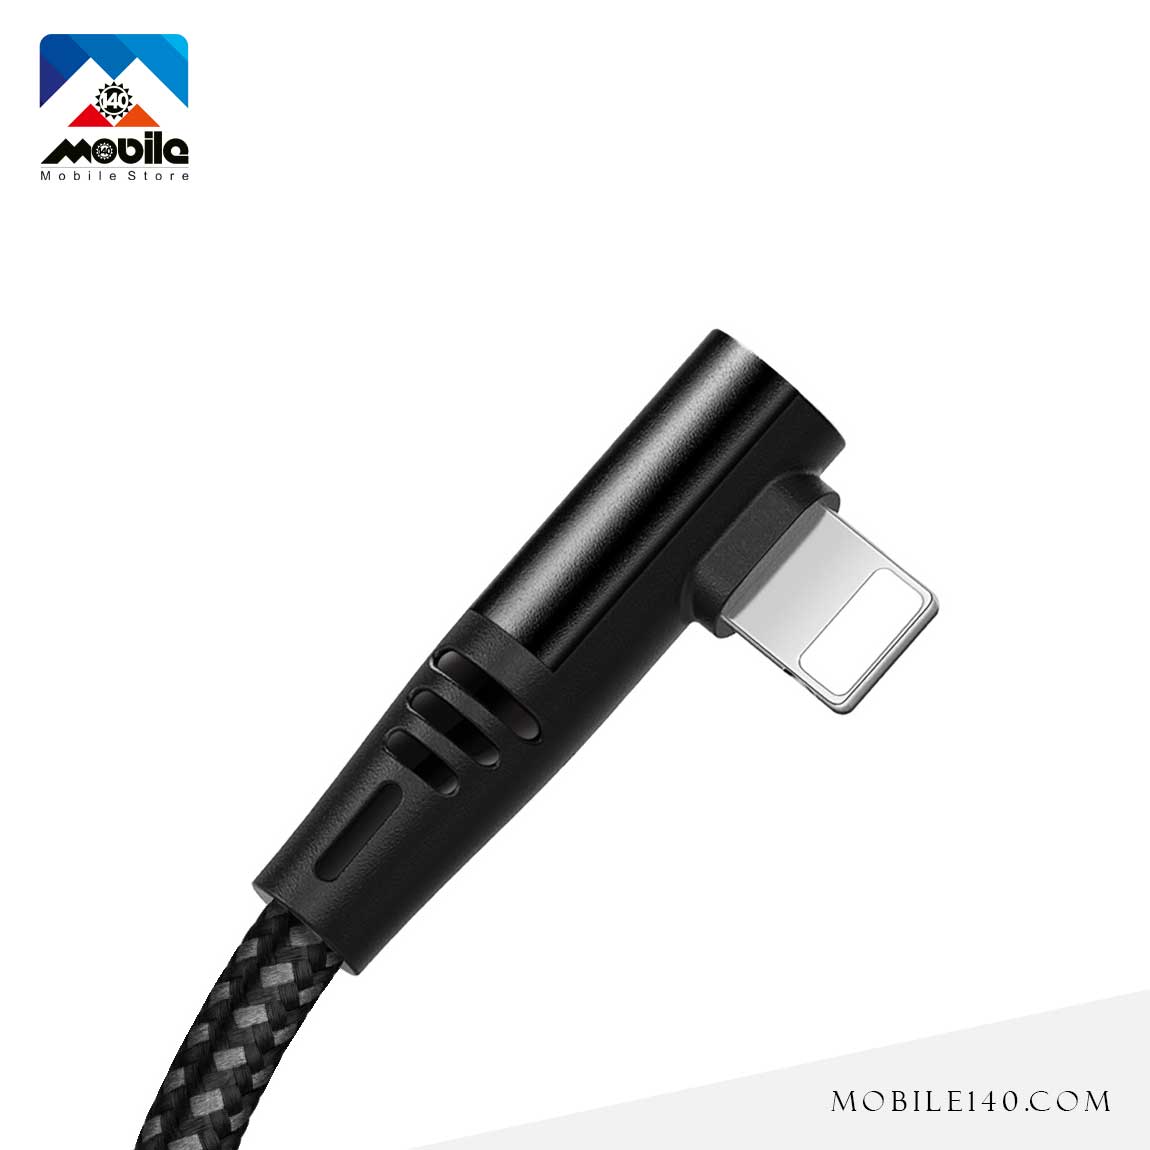 Macdodo CA-640 Lightning to HDMI and USB Cable 2